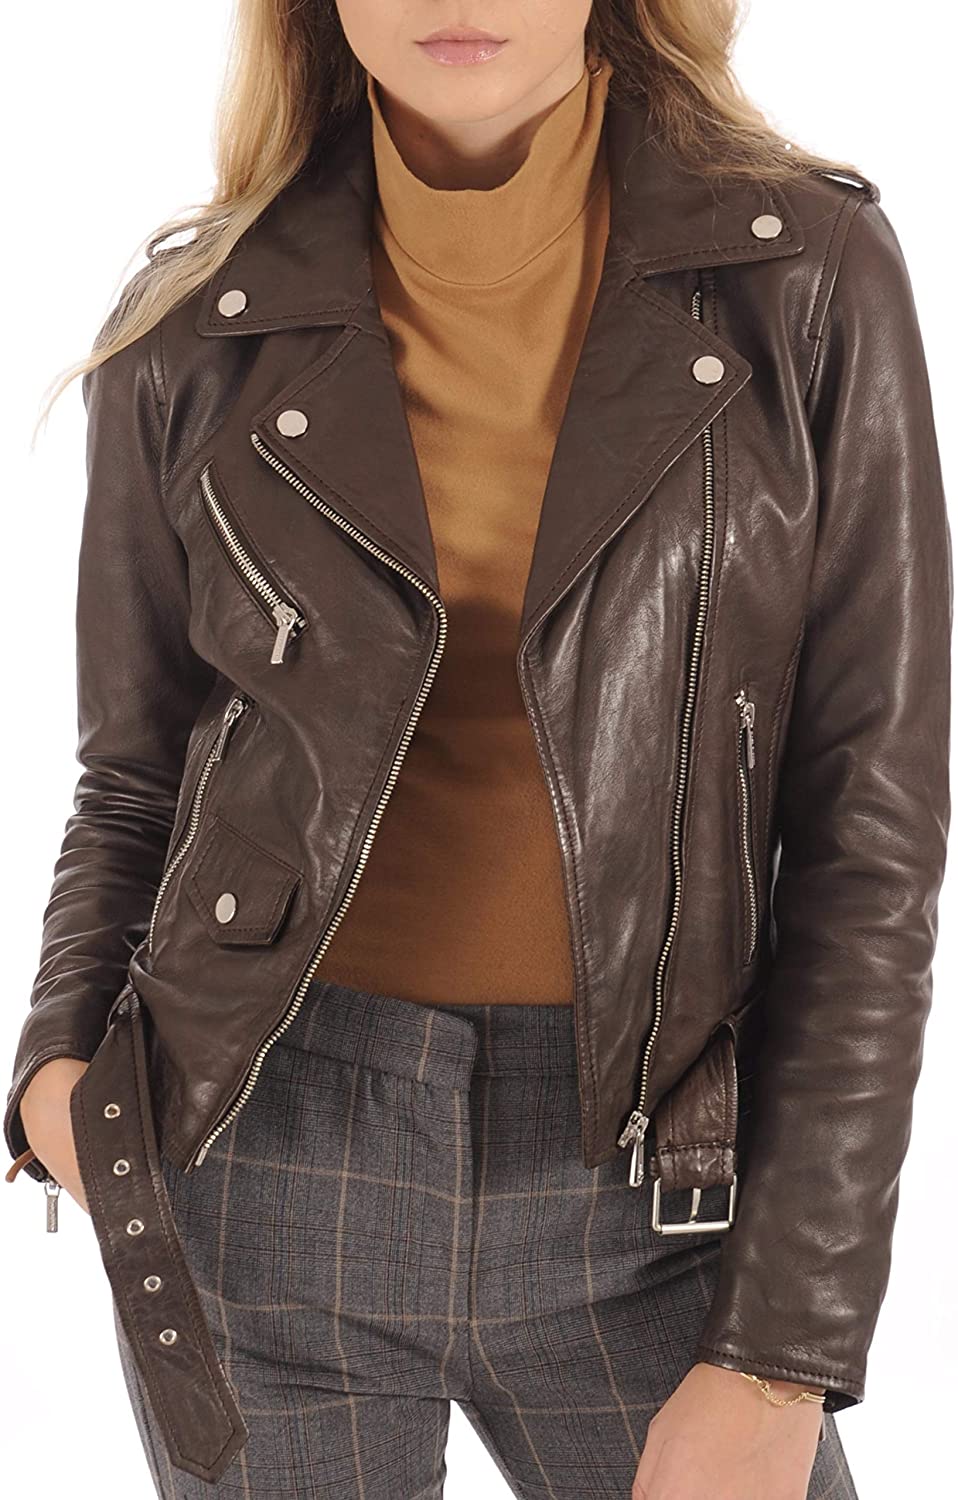 KYZER KRAFT Womens Leather Jacket Bomber Motorcycle Biker Real Lambskin Leather Jacket for Womens Collection-03